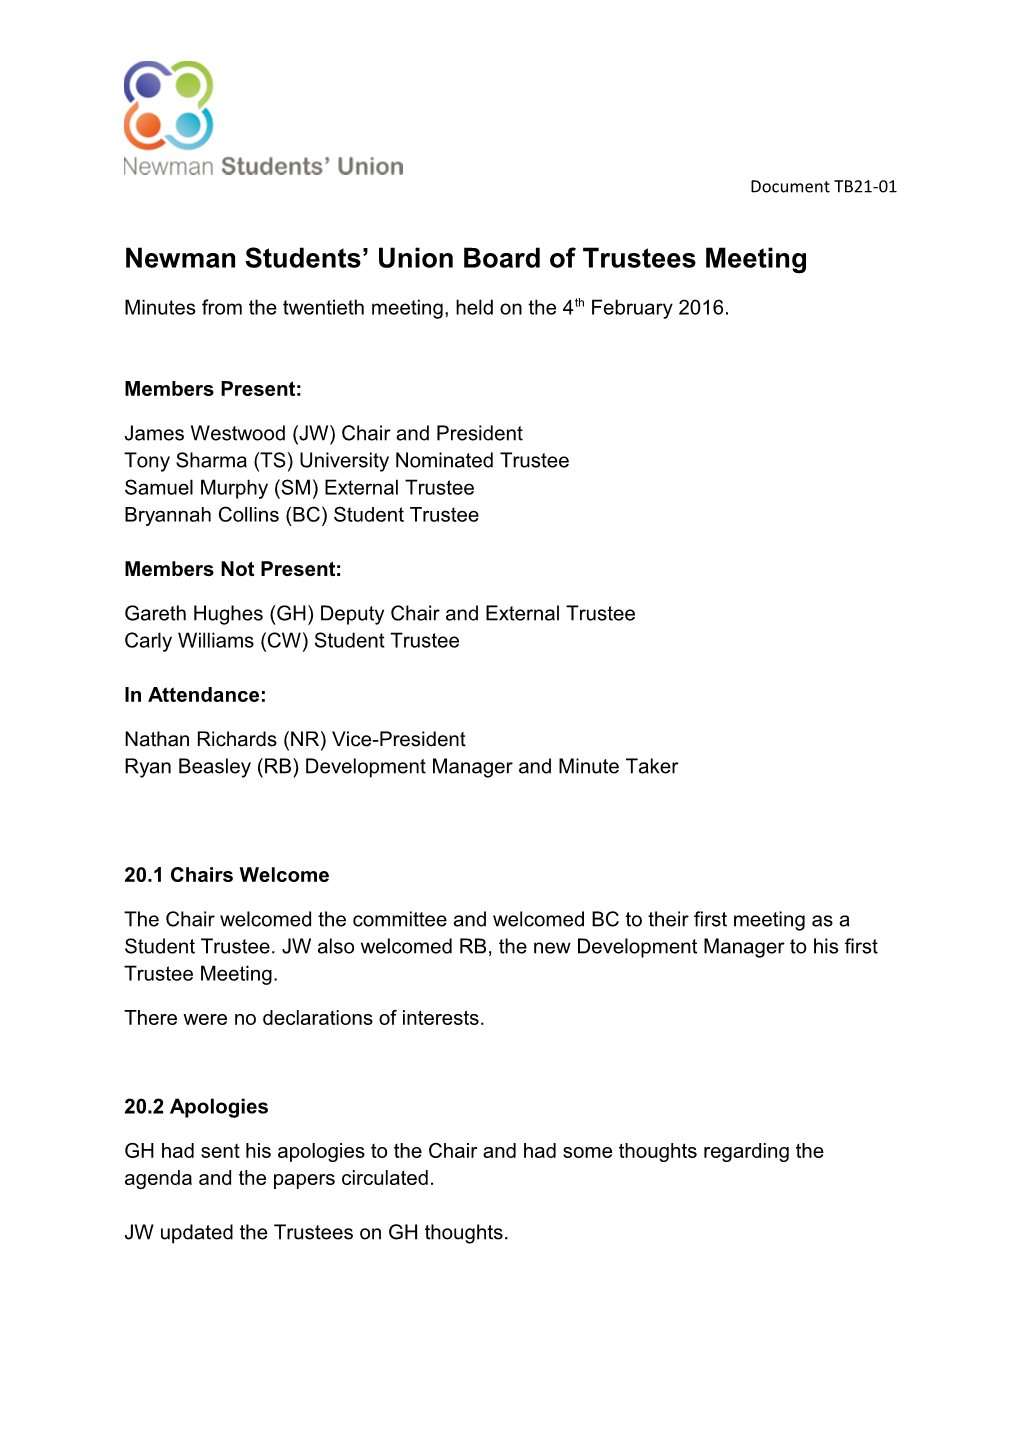 Newman Students Union Board of Trustees Meeting